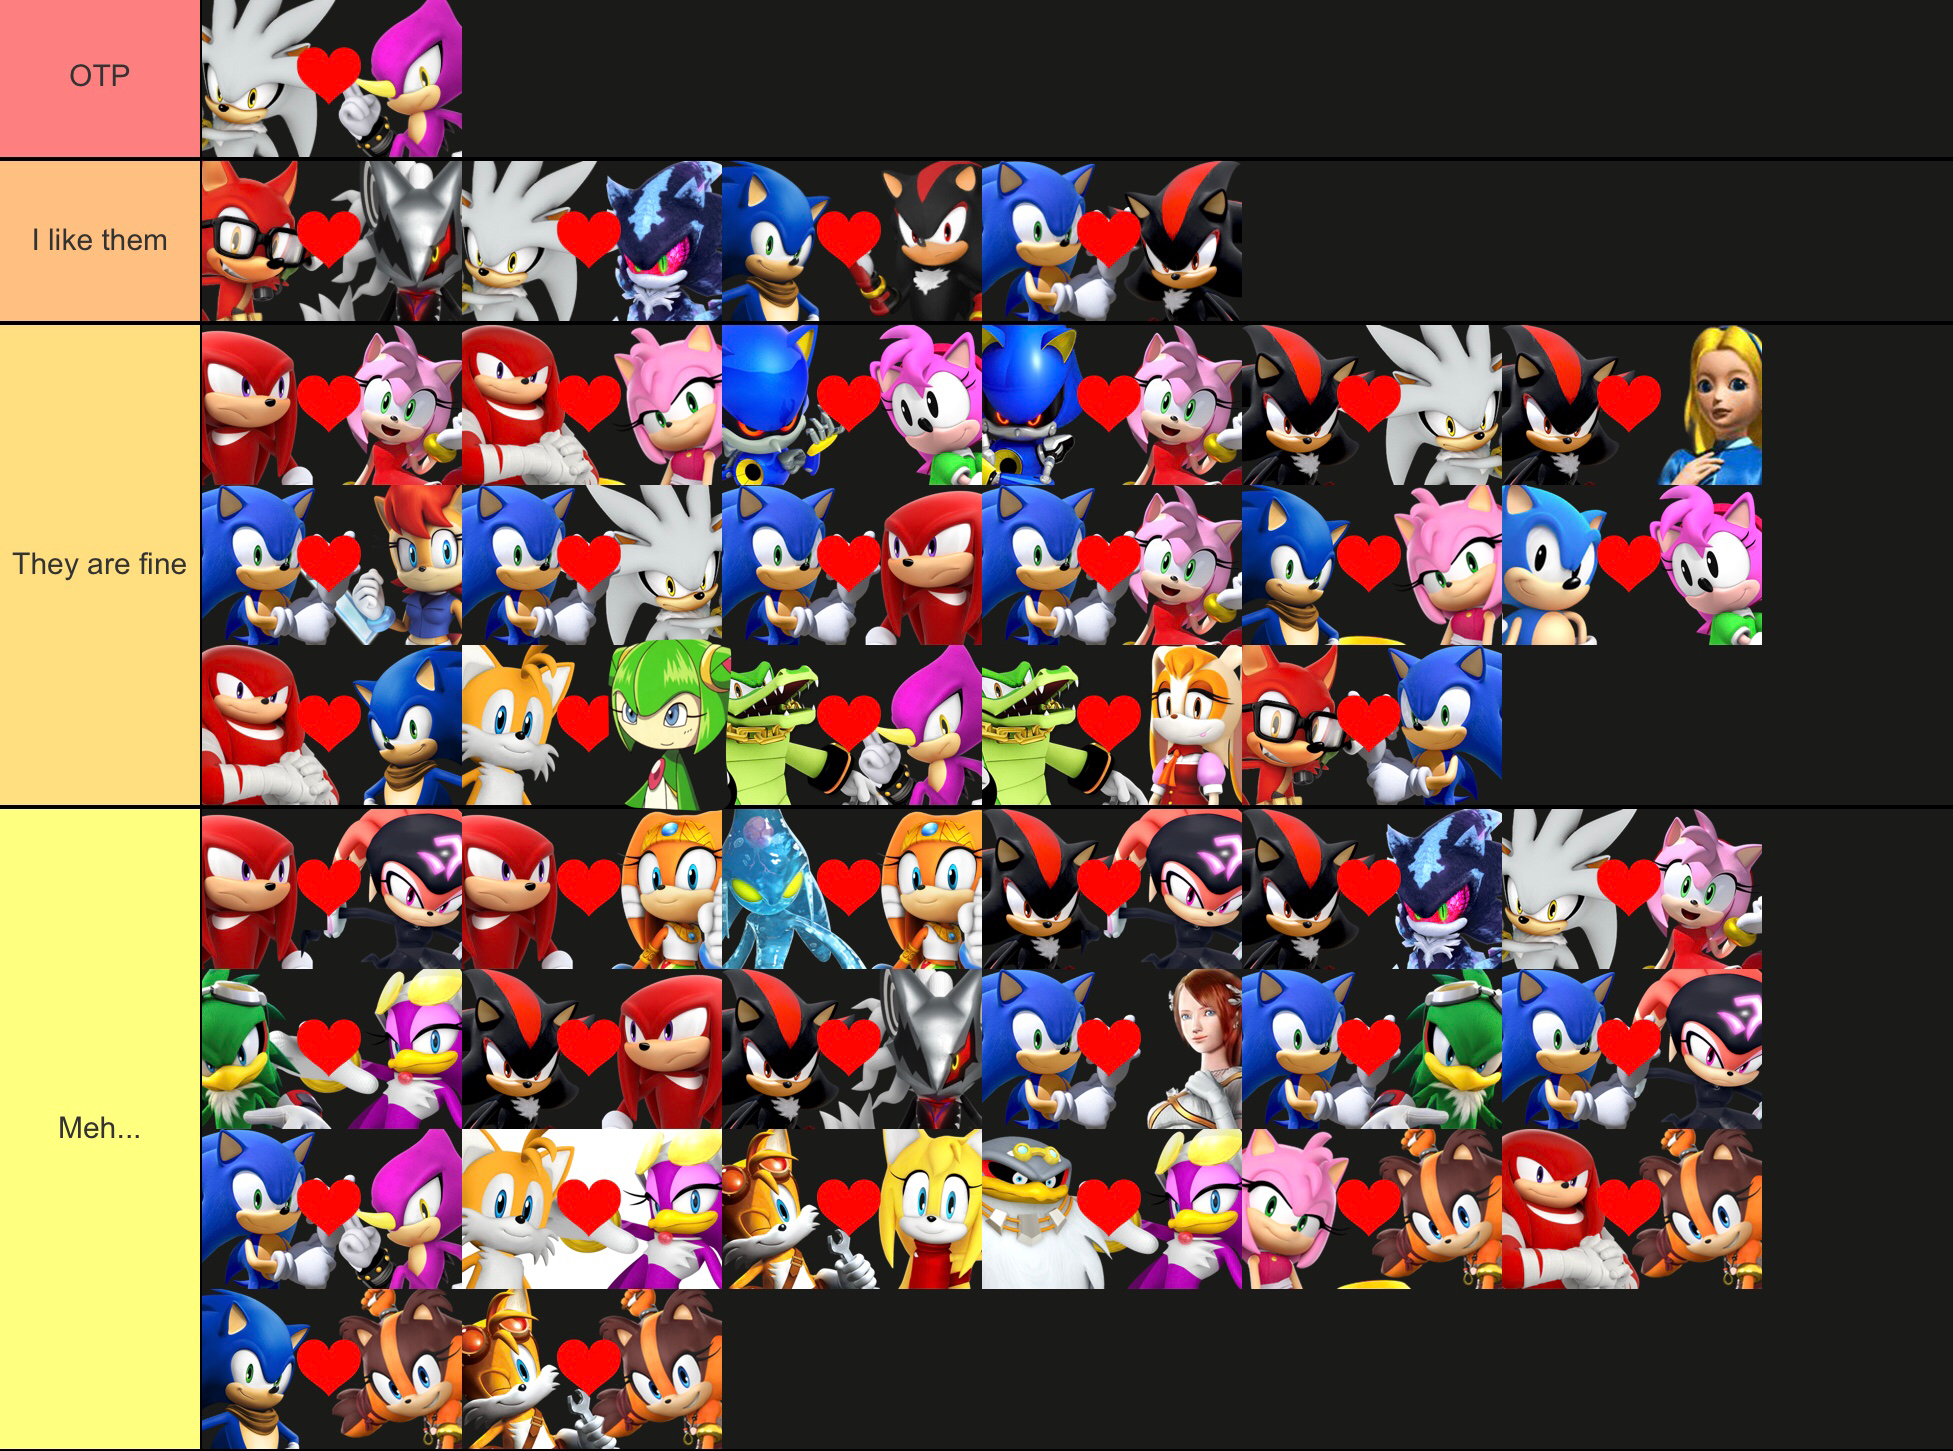 Create a Sonic The Hedgehog Games Tier List - TierMaker